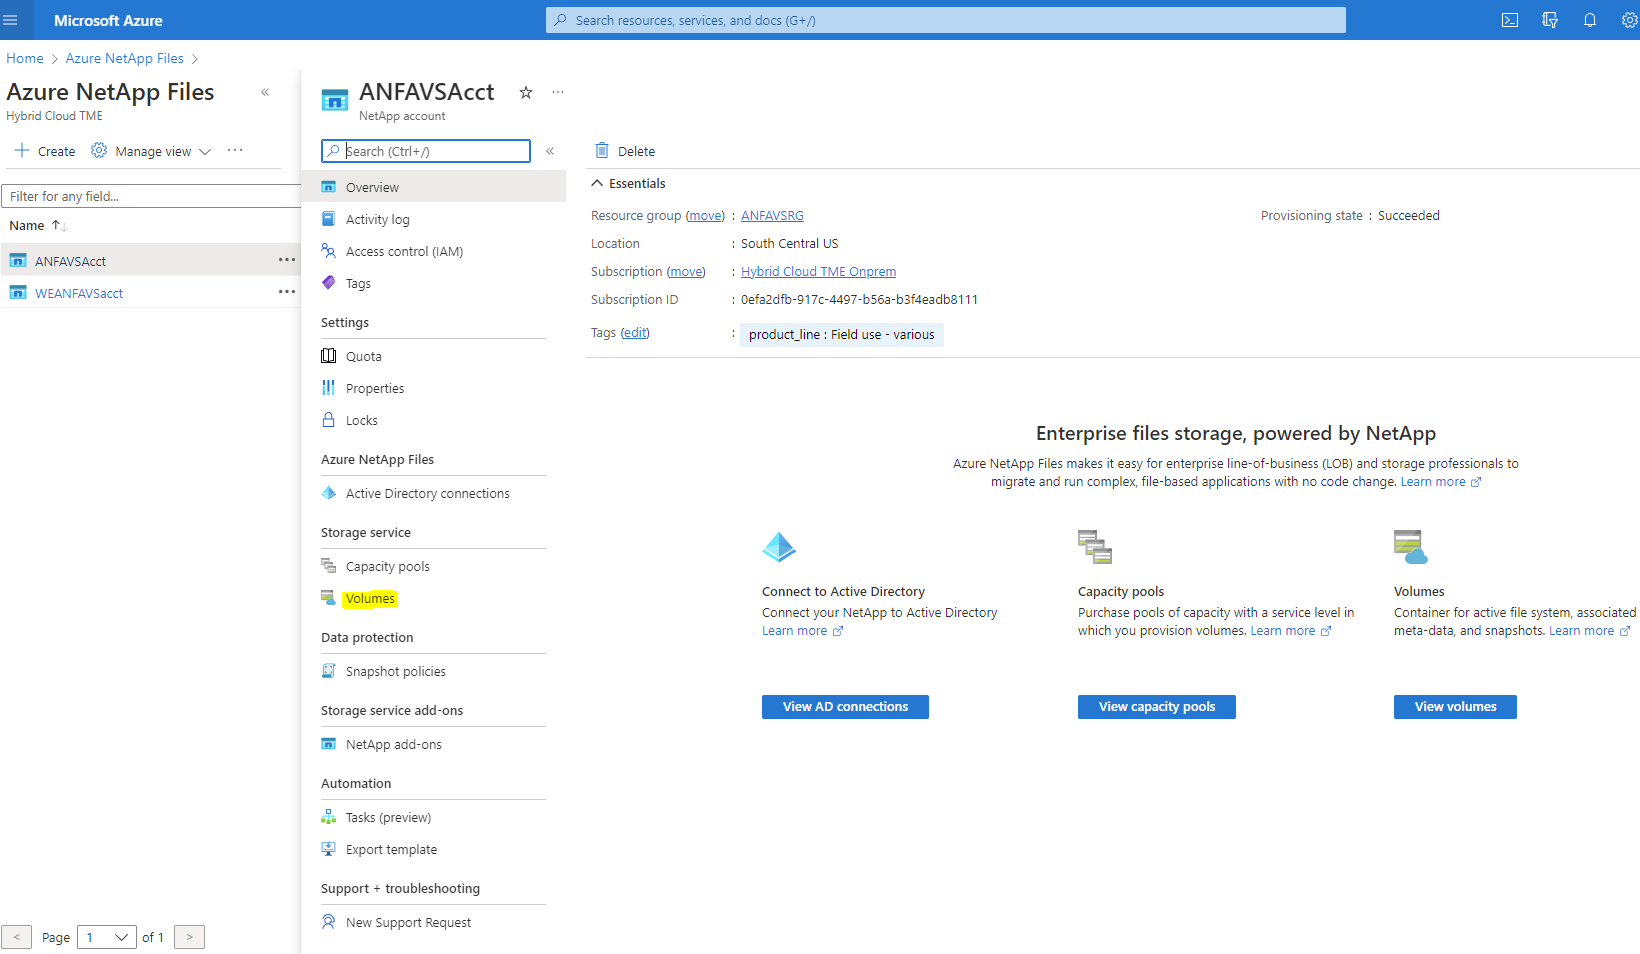 This screenshot shows the landing screen for a NetApp storage account.